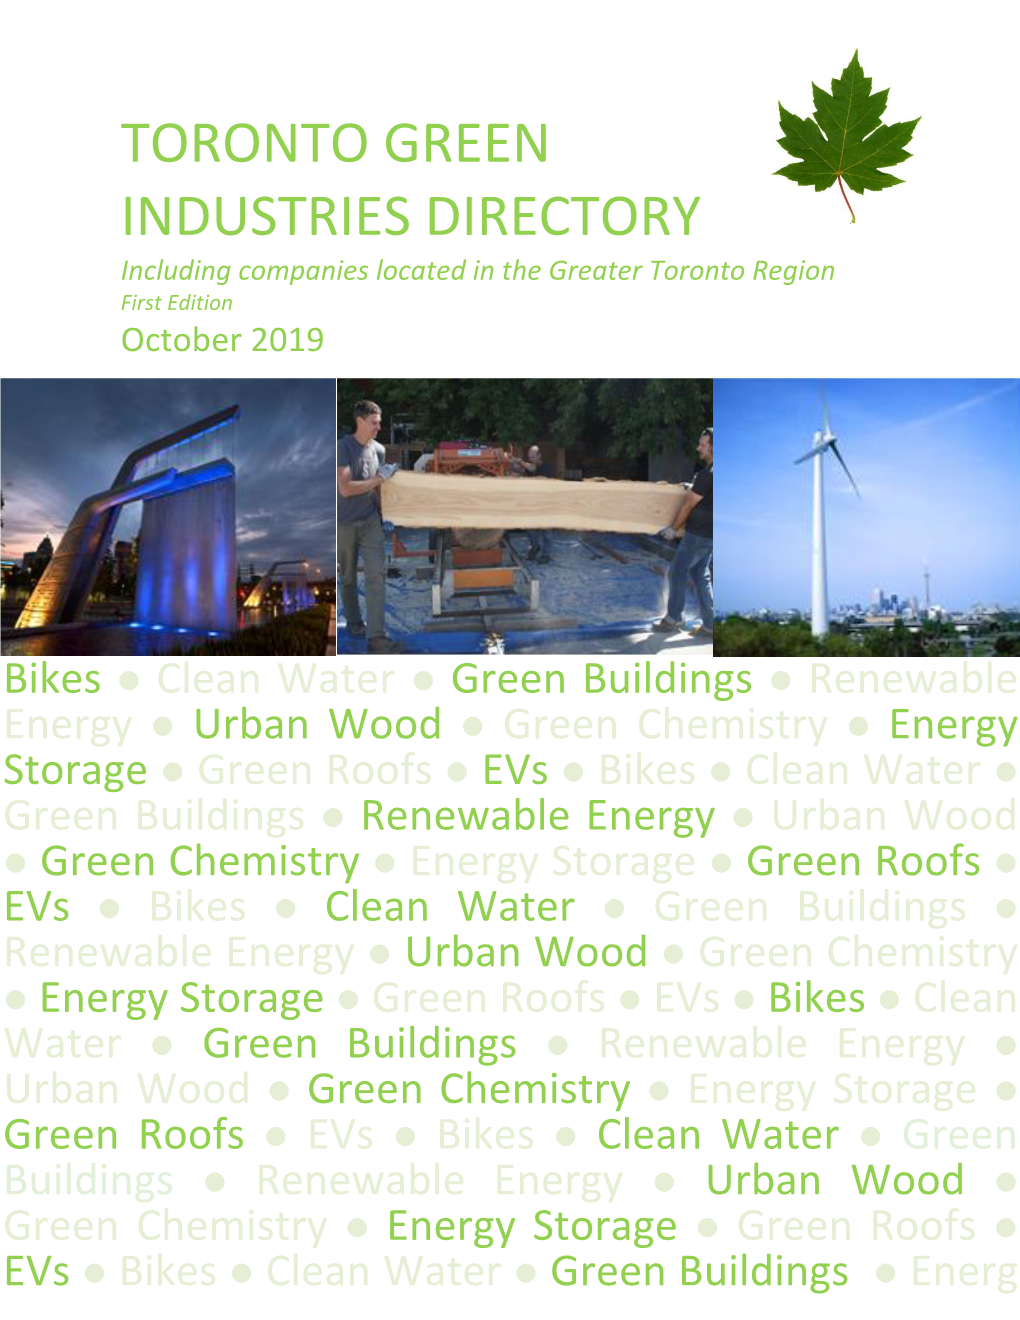 TORONTO GREEN INDUSTRIES DIRECTORY Including Companies Located in the Greater Toronto Region First Edition October 2019